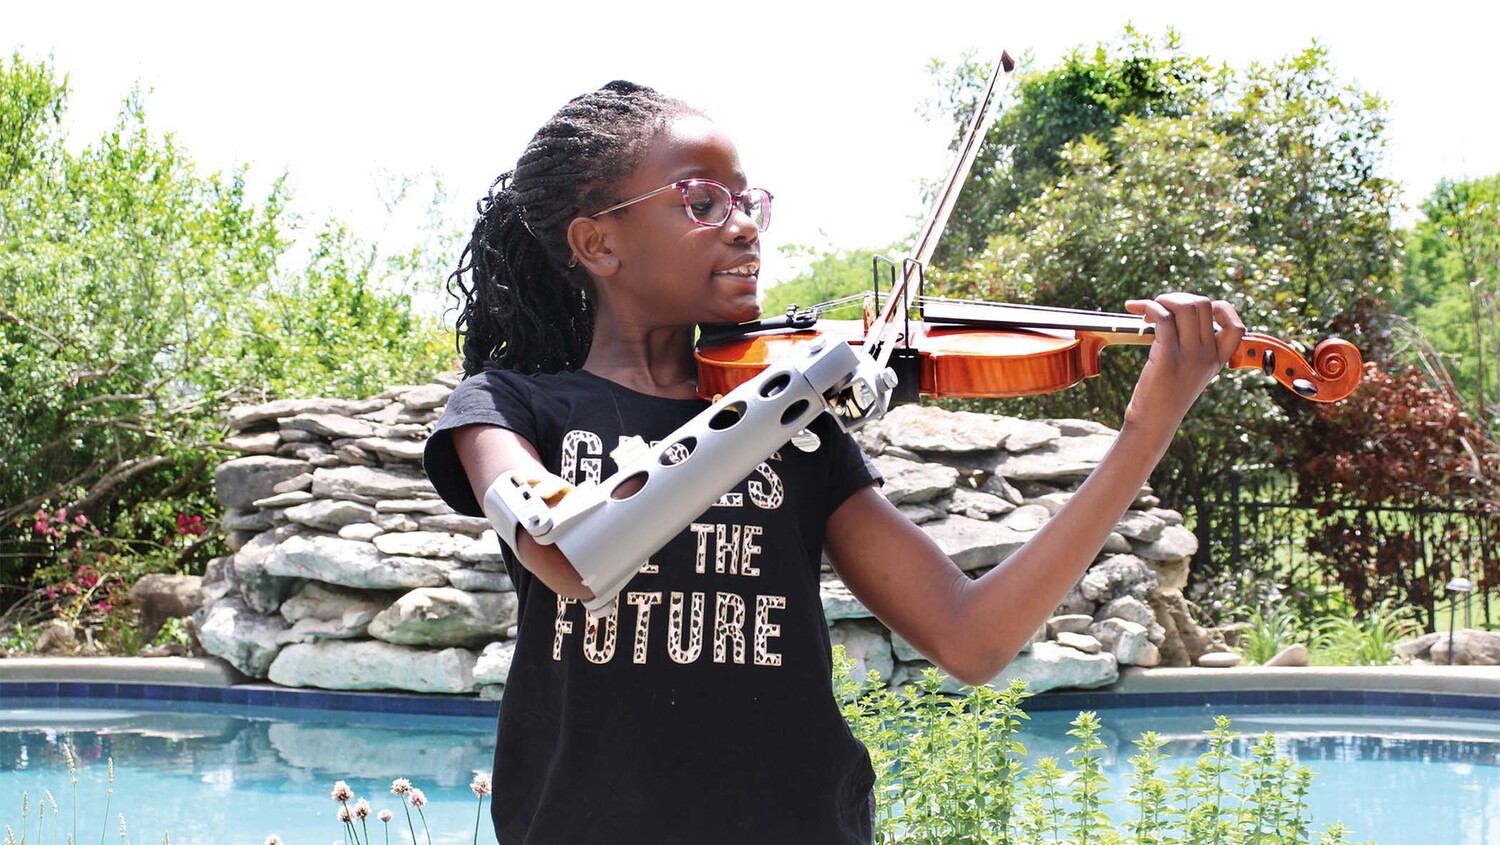 How Did a Team at OU-Tulsa Help a Young Girl Learn to Play the Violin?